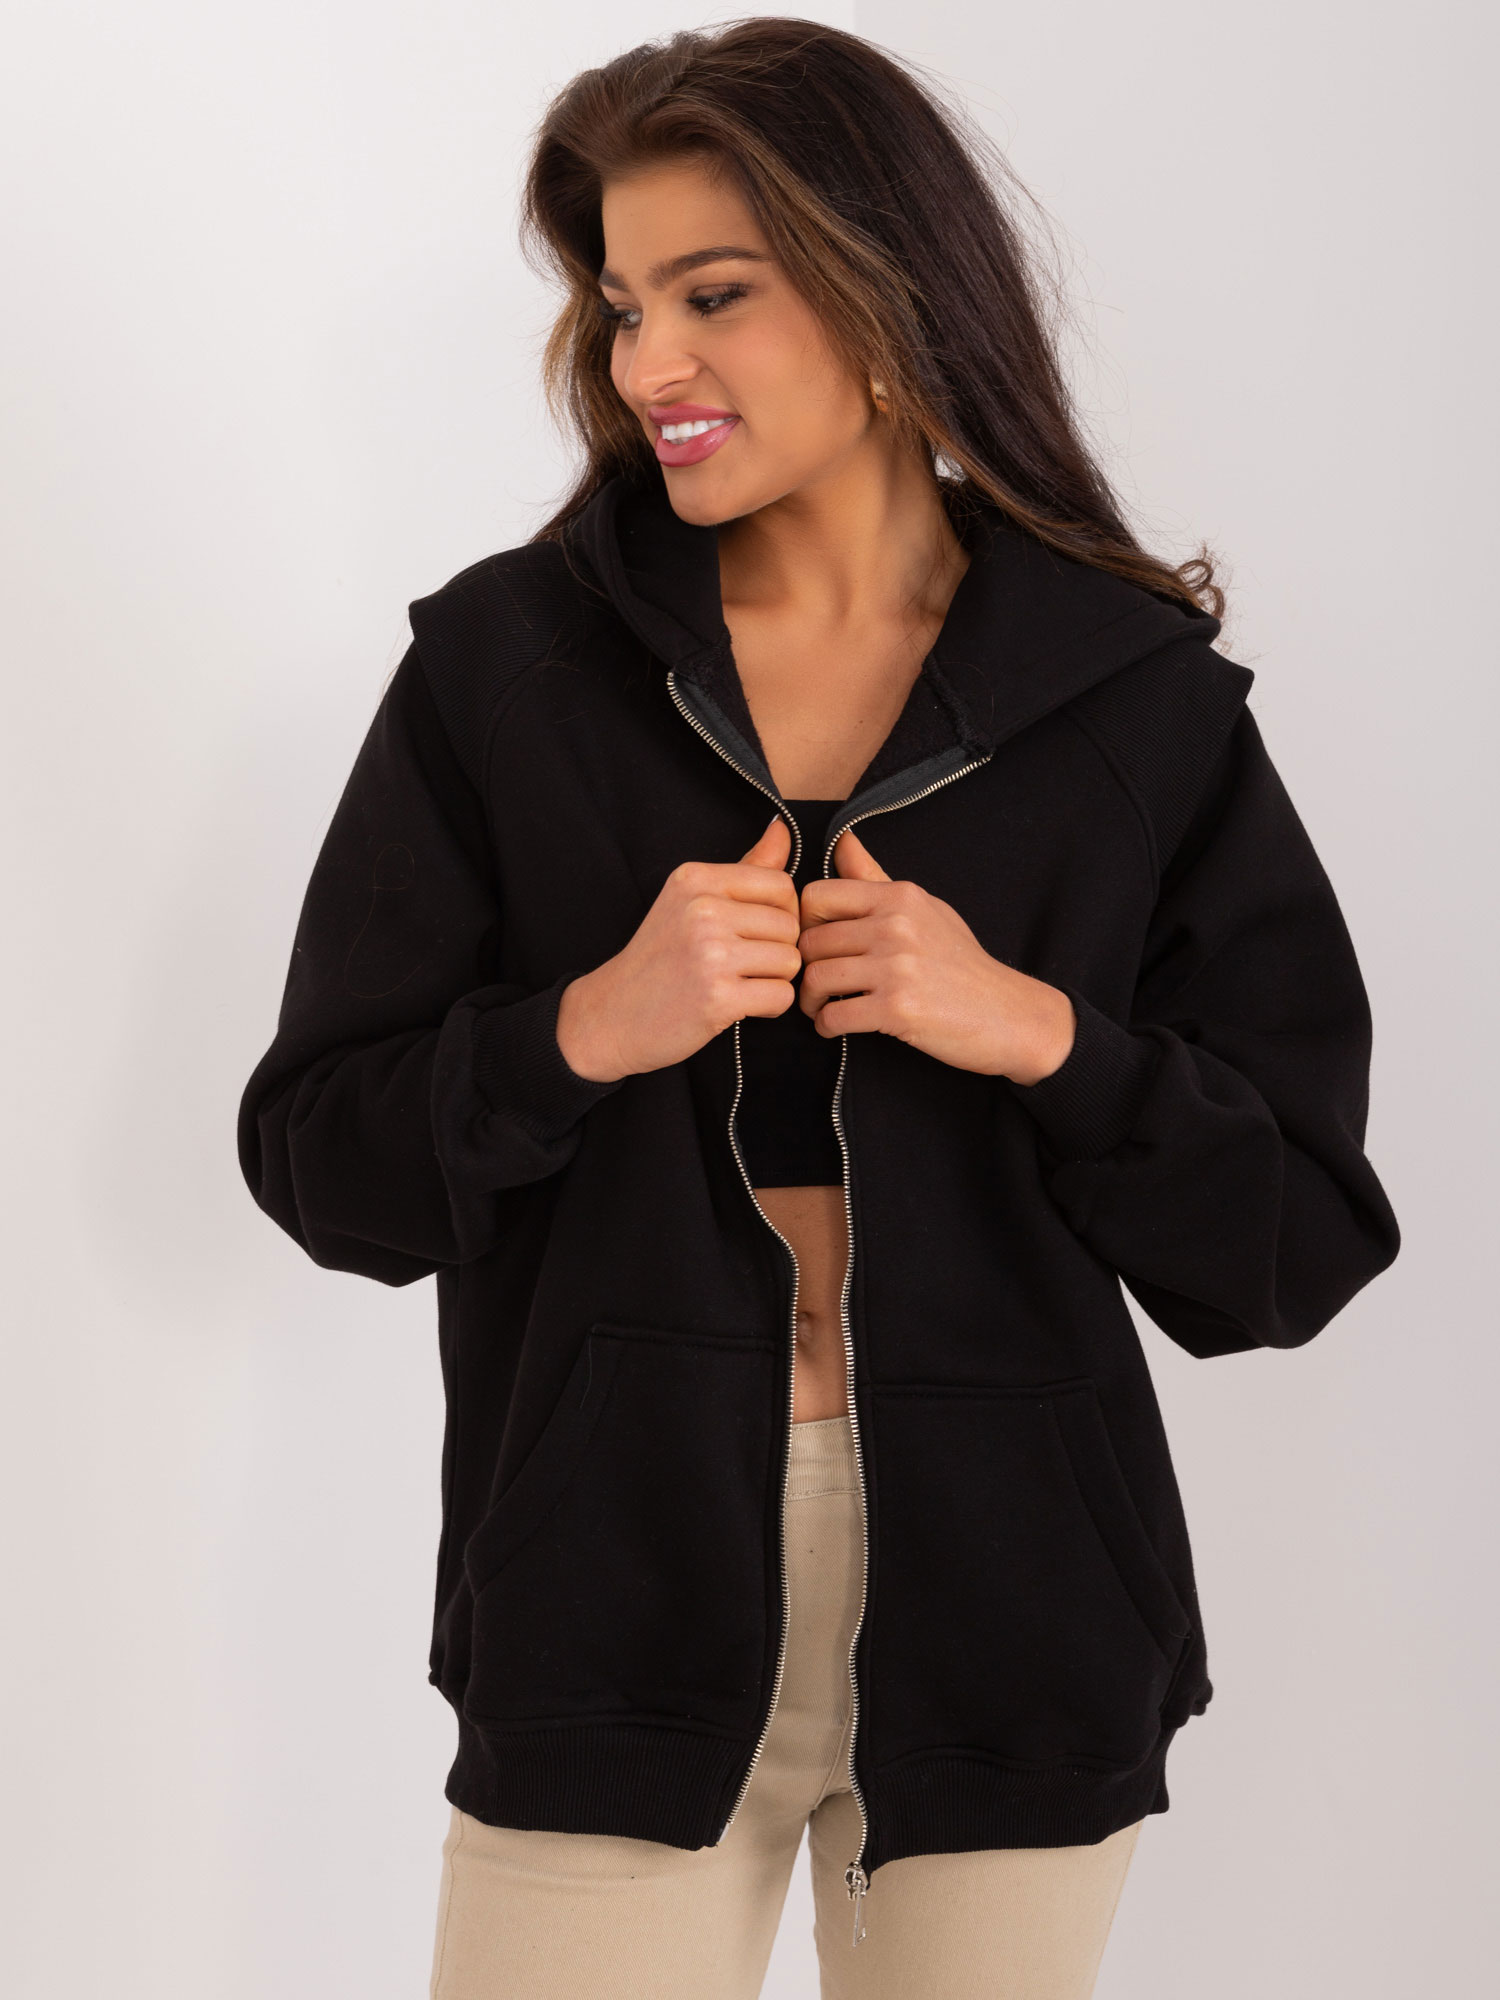 Black zip-up sweatshirt with ribbed inserts